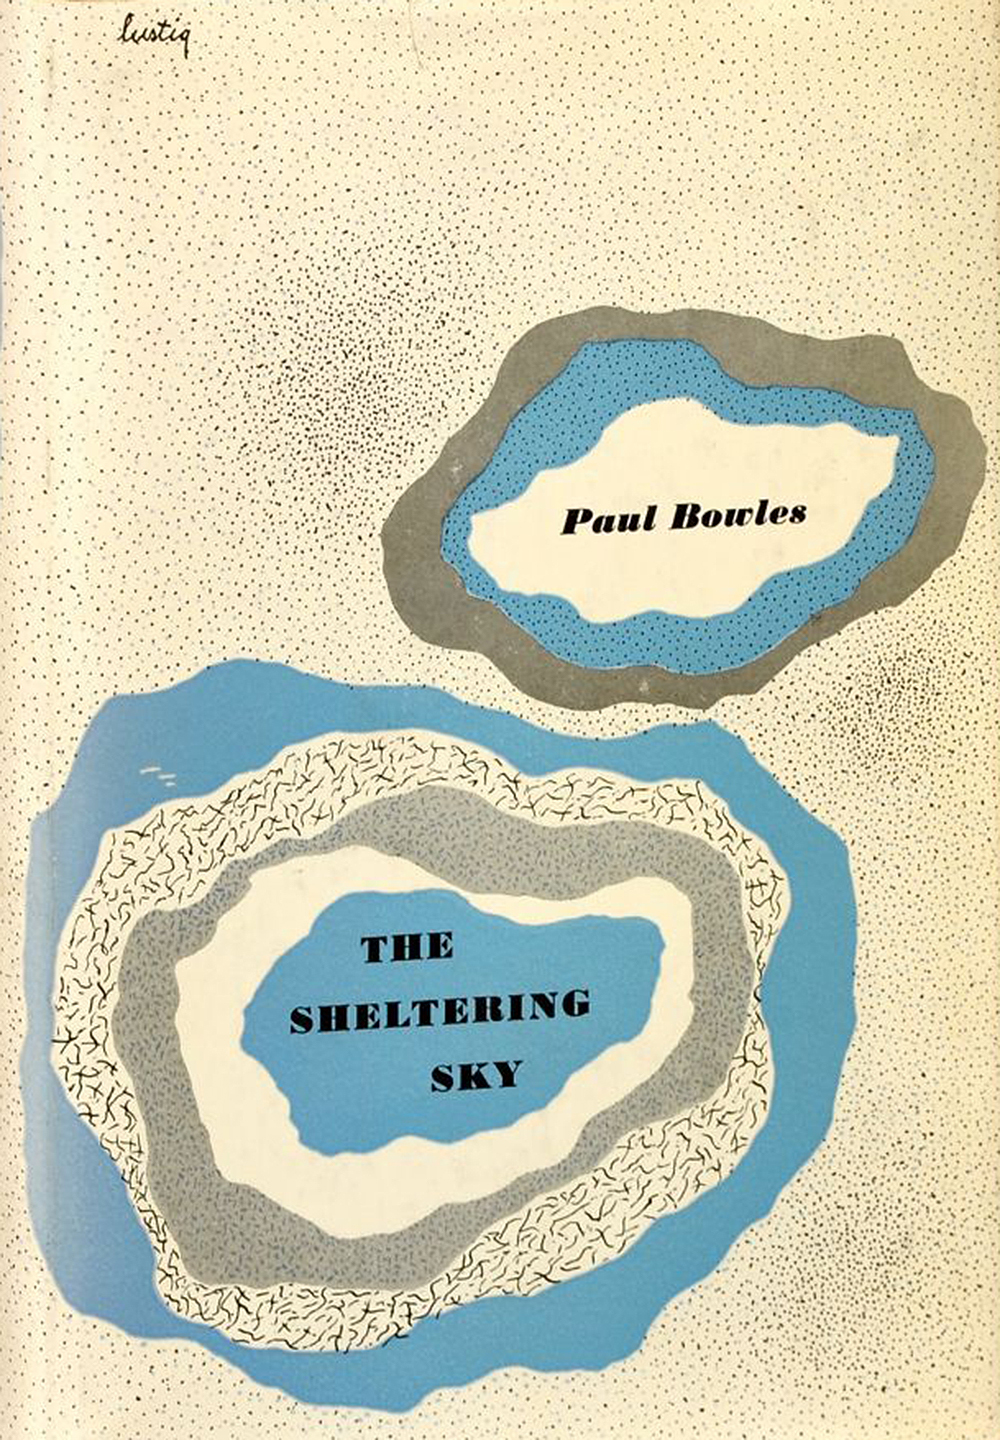 Paul Bowles, The Sheltering Sky (New Directions, 1949).